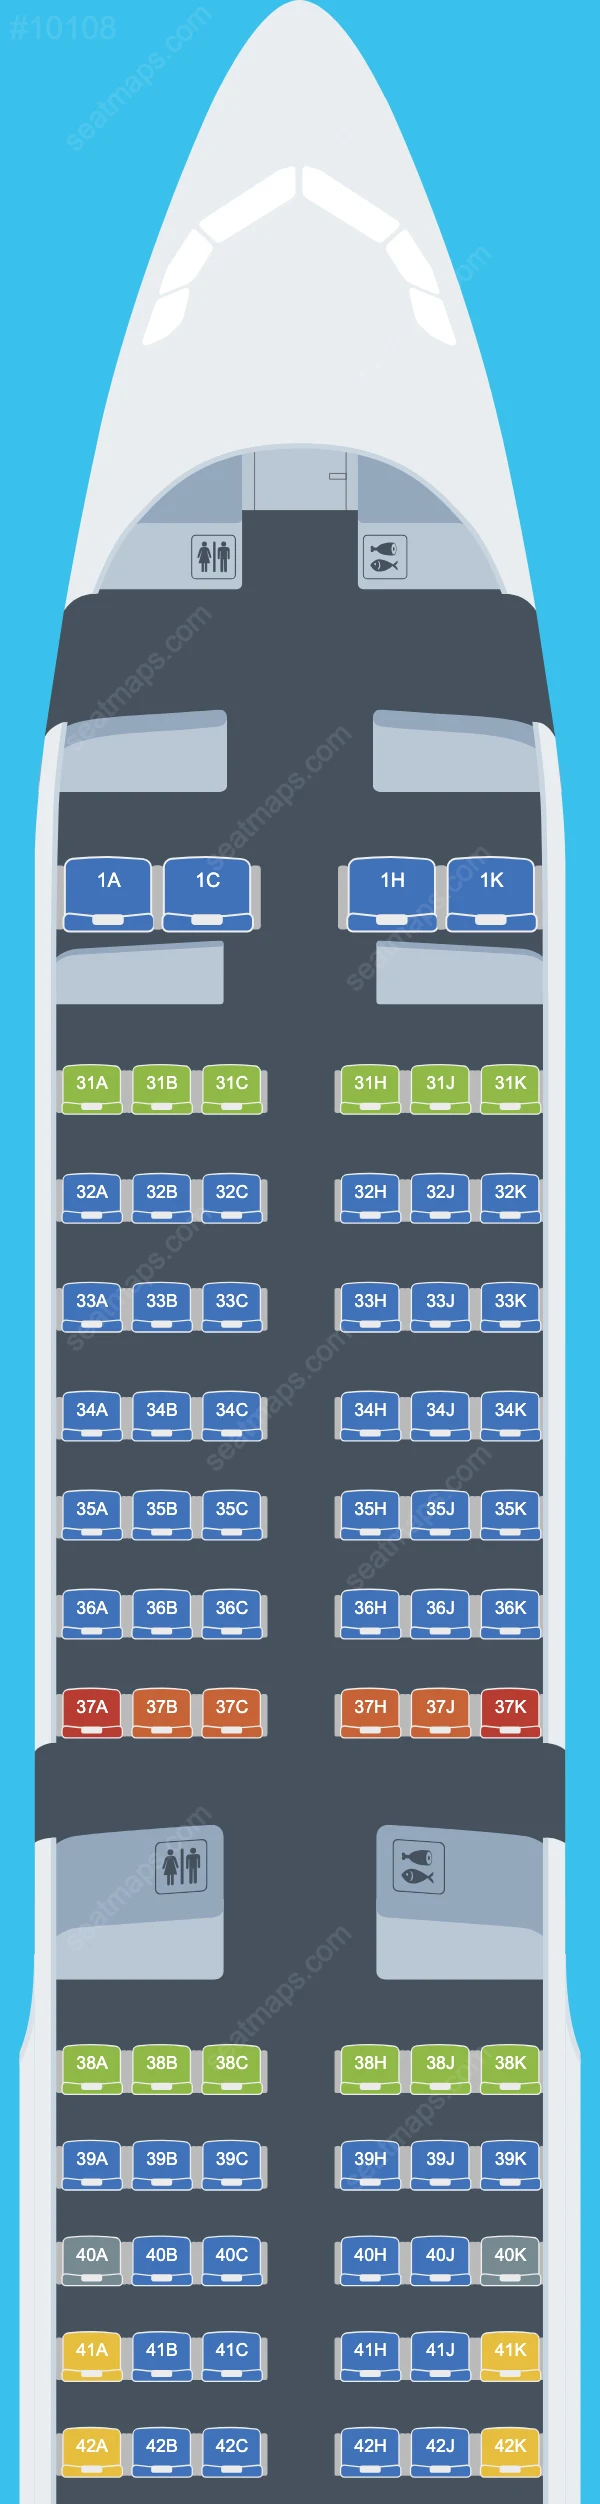 China Southern Airbus A321 Seat Maps A321-200 V.3